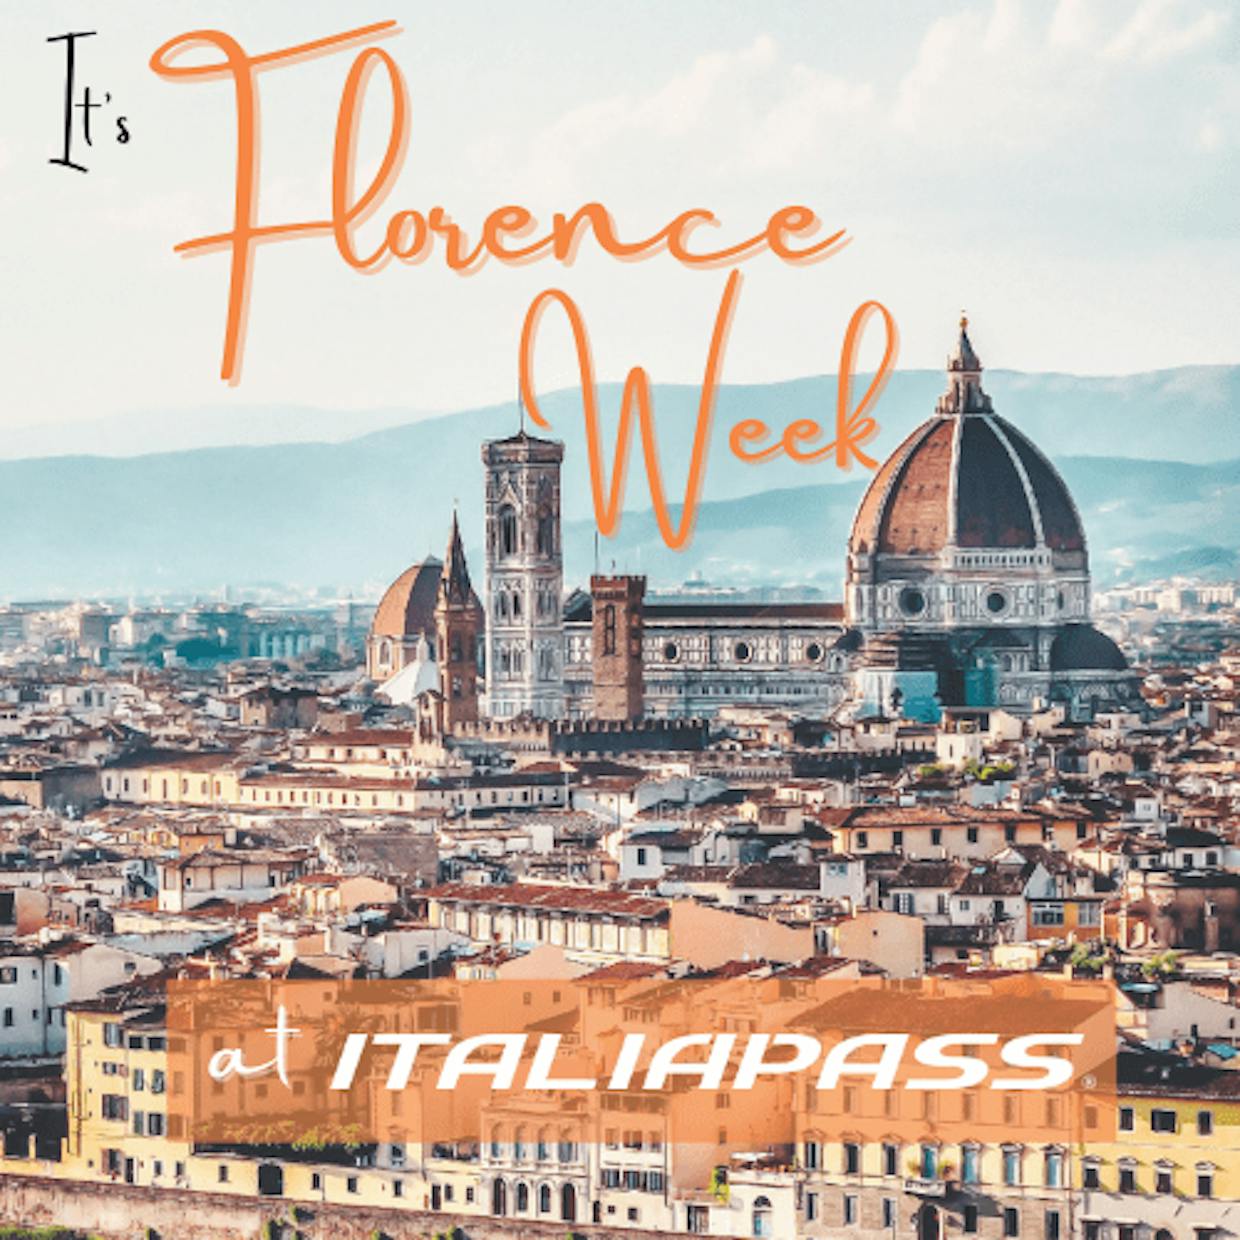 Are you a Renaissance man or woman? Show your stuff during Florence Week challenges!